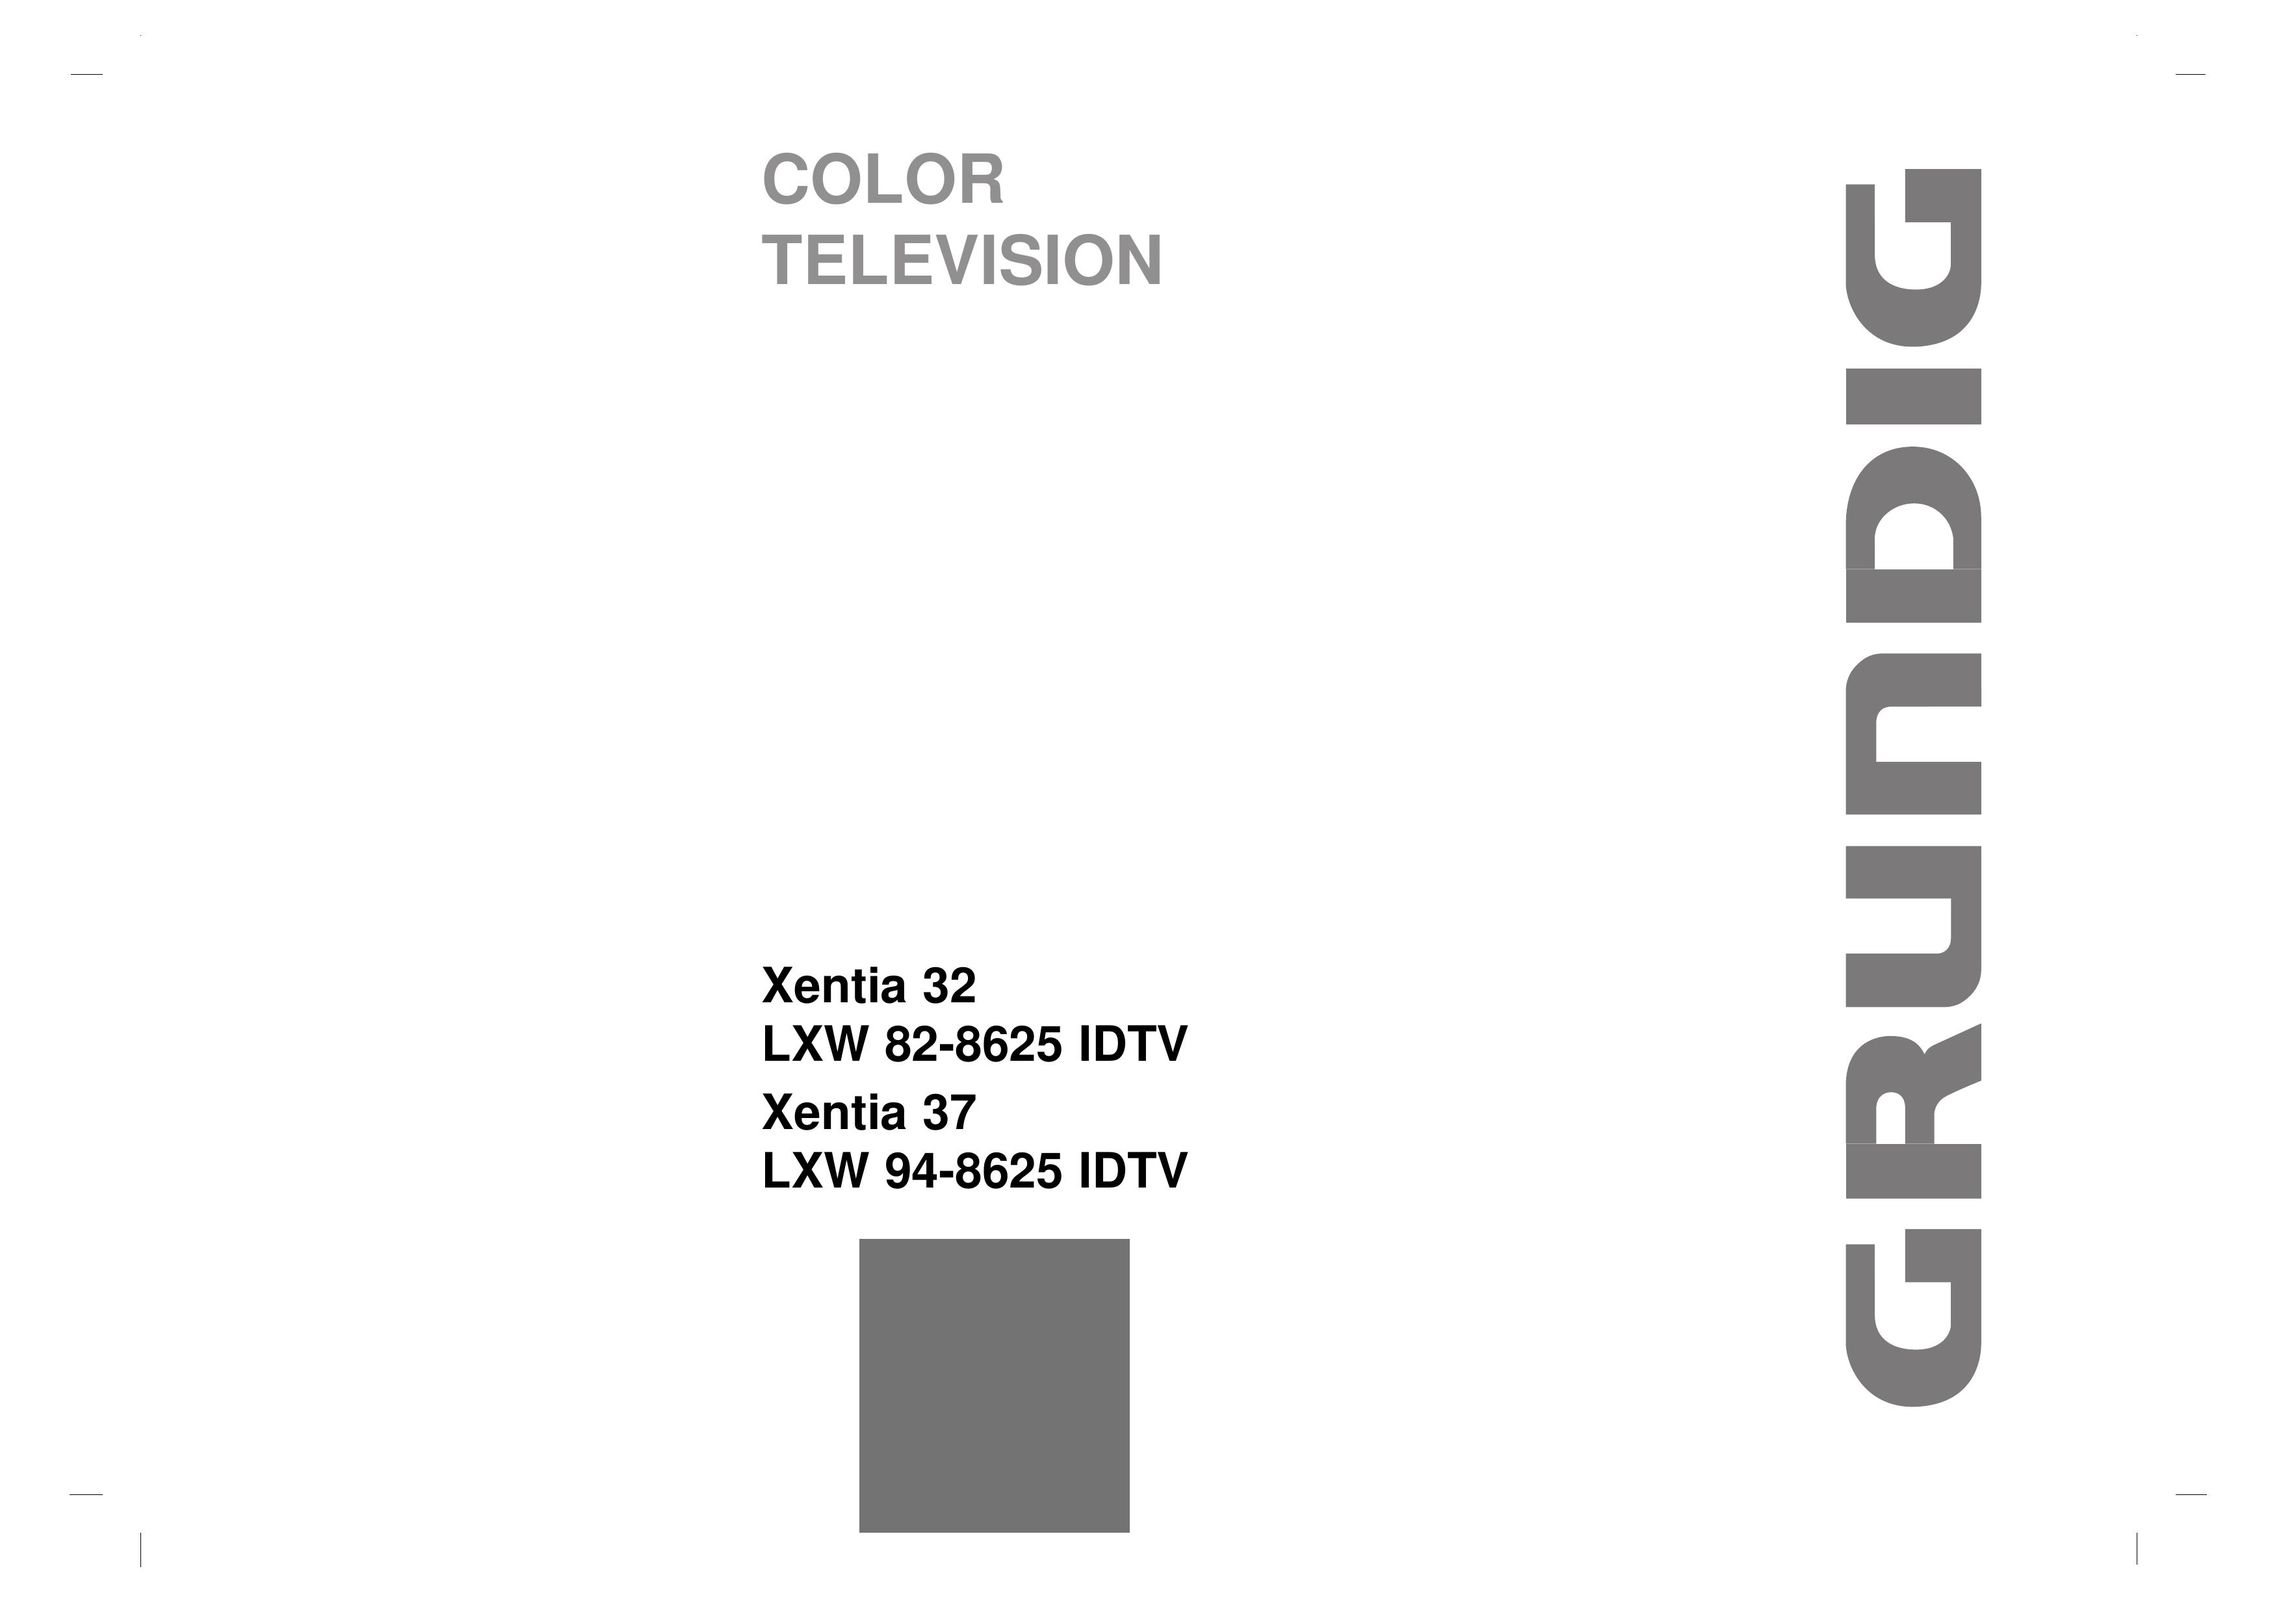 Grundig LXW 82-8625 IDTV, LXW 94-8625 IDTV CRT Television User Manual